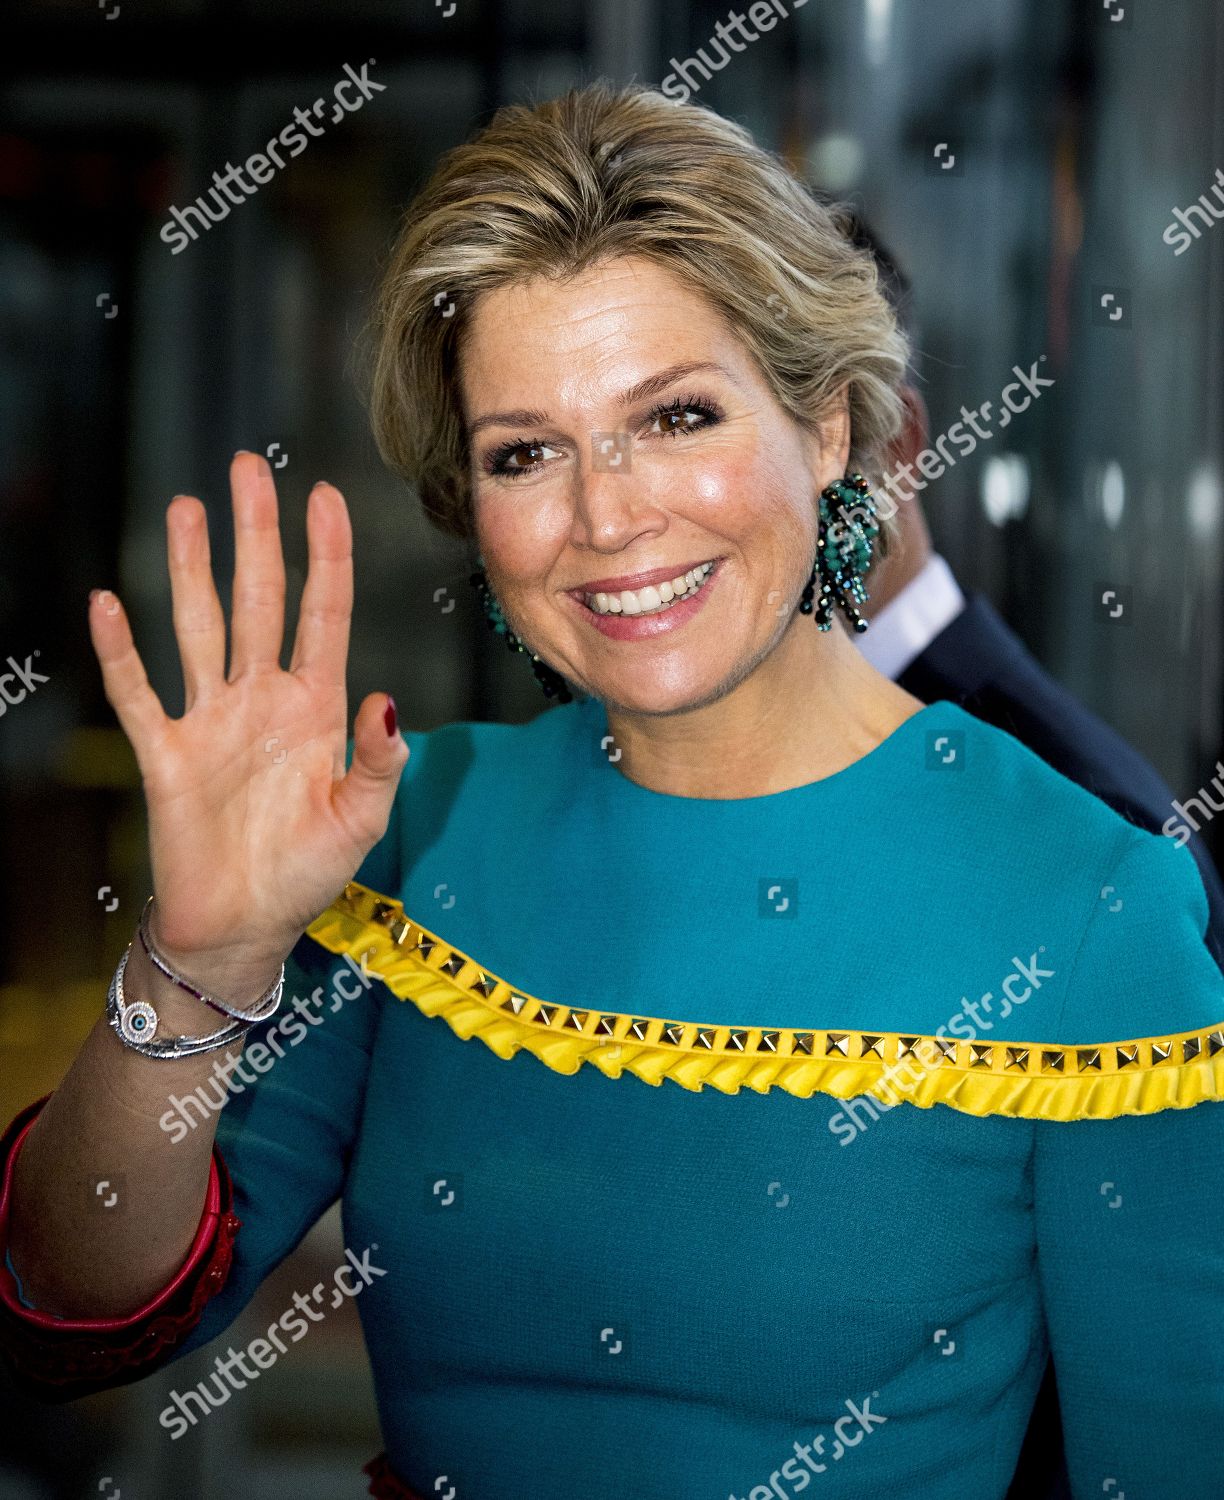 queen-maxima-presents-the-prince-bernhard-culture-fund-prize-2018-to-conductor-and-composer-reinbert-de-leeuw-amsterdam-the-netherlands-shutterstock-editorial-9993191f.jpg